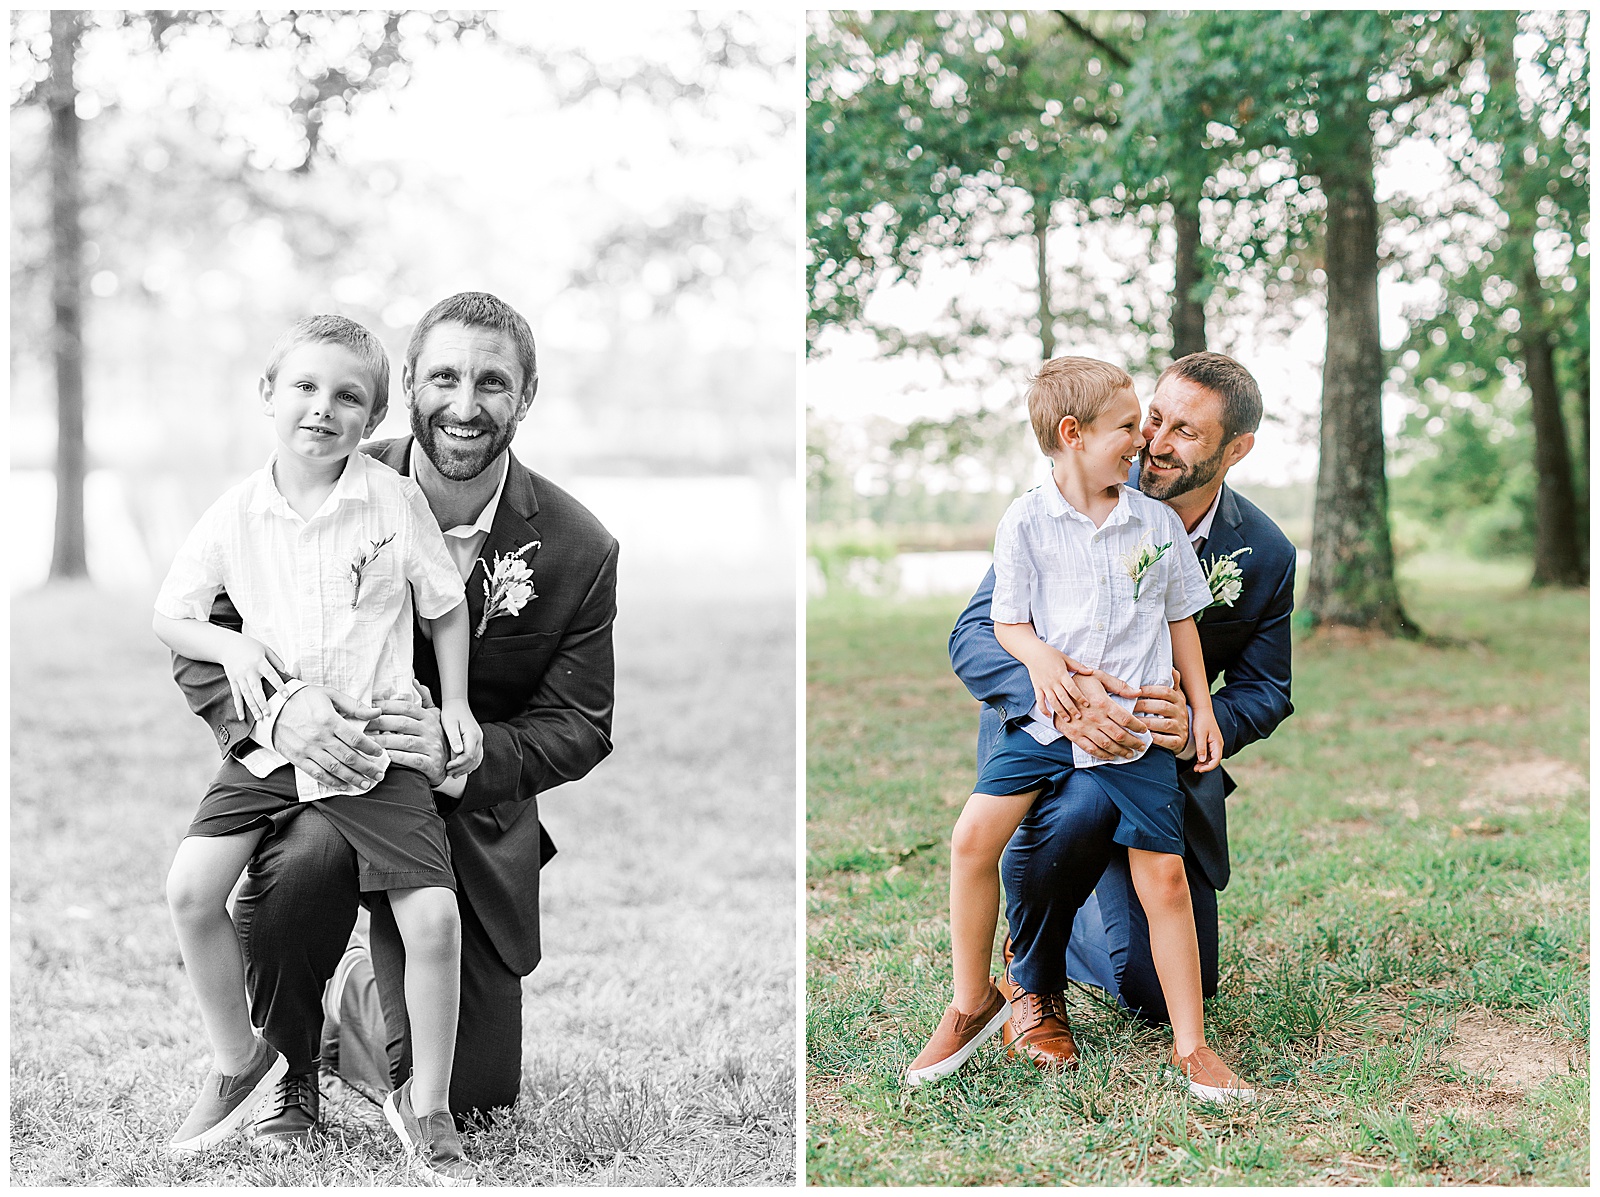 sweet father son groom portrait outdoor in summer